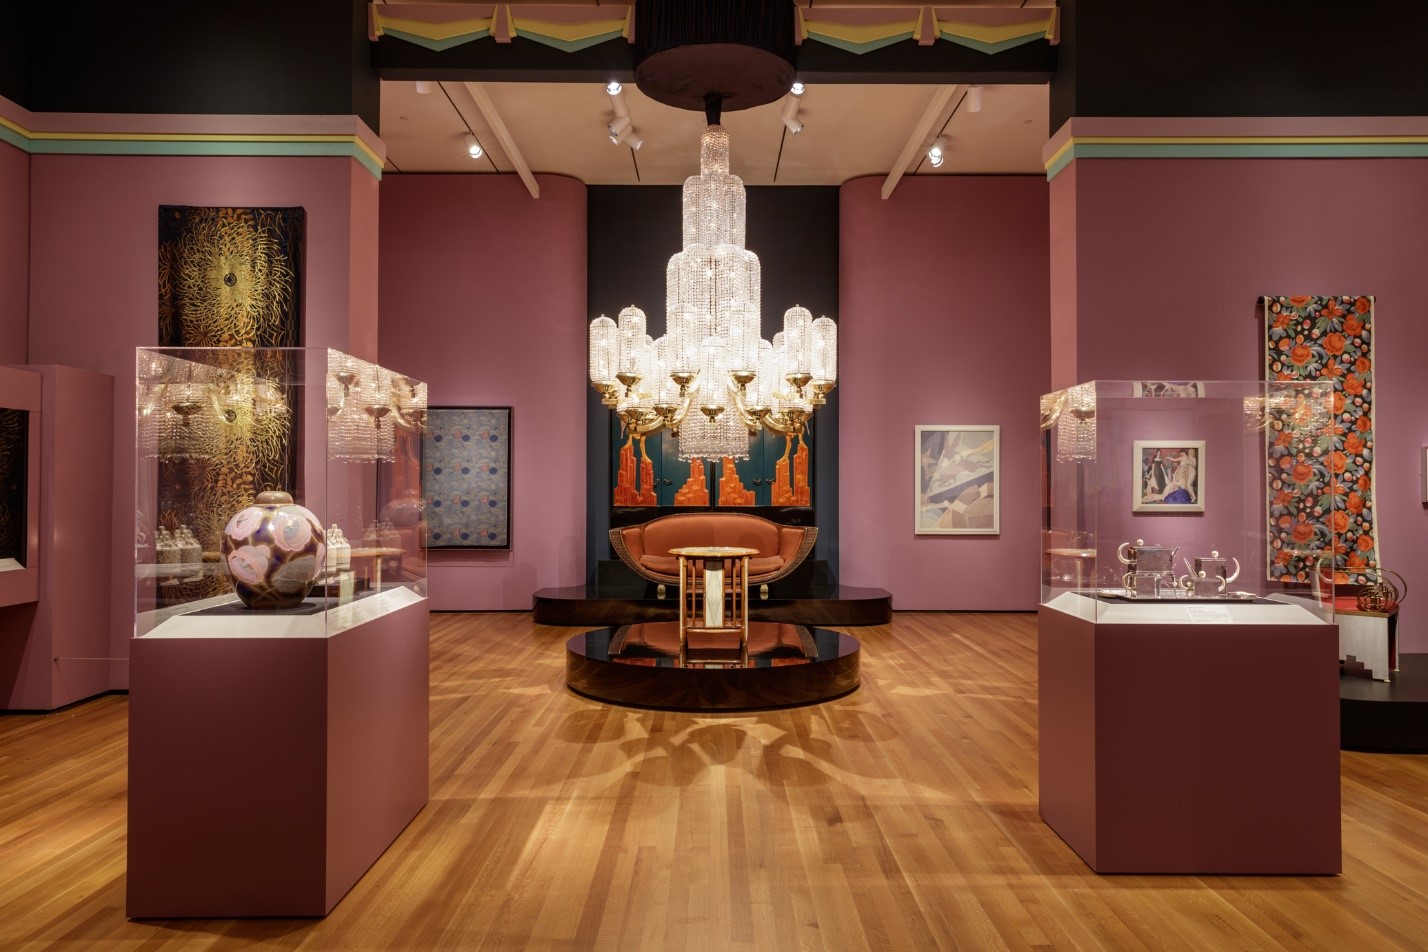 A gallery from the exhibition The Jazz Age: American Style in the 1920s, with decorative arts like a chandelier, furniture, and ceramics on display.